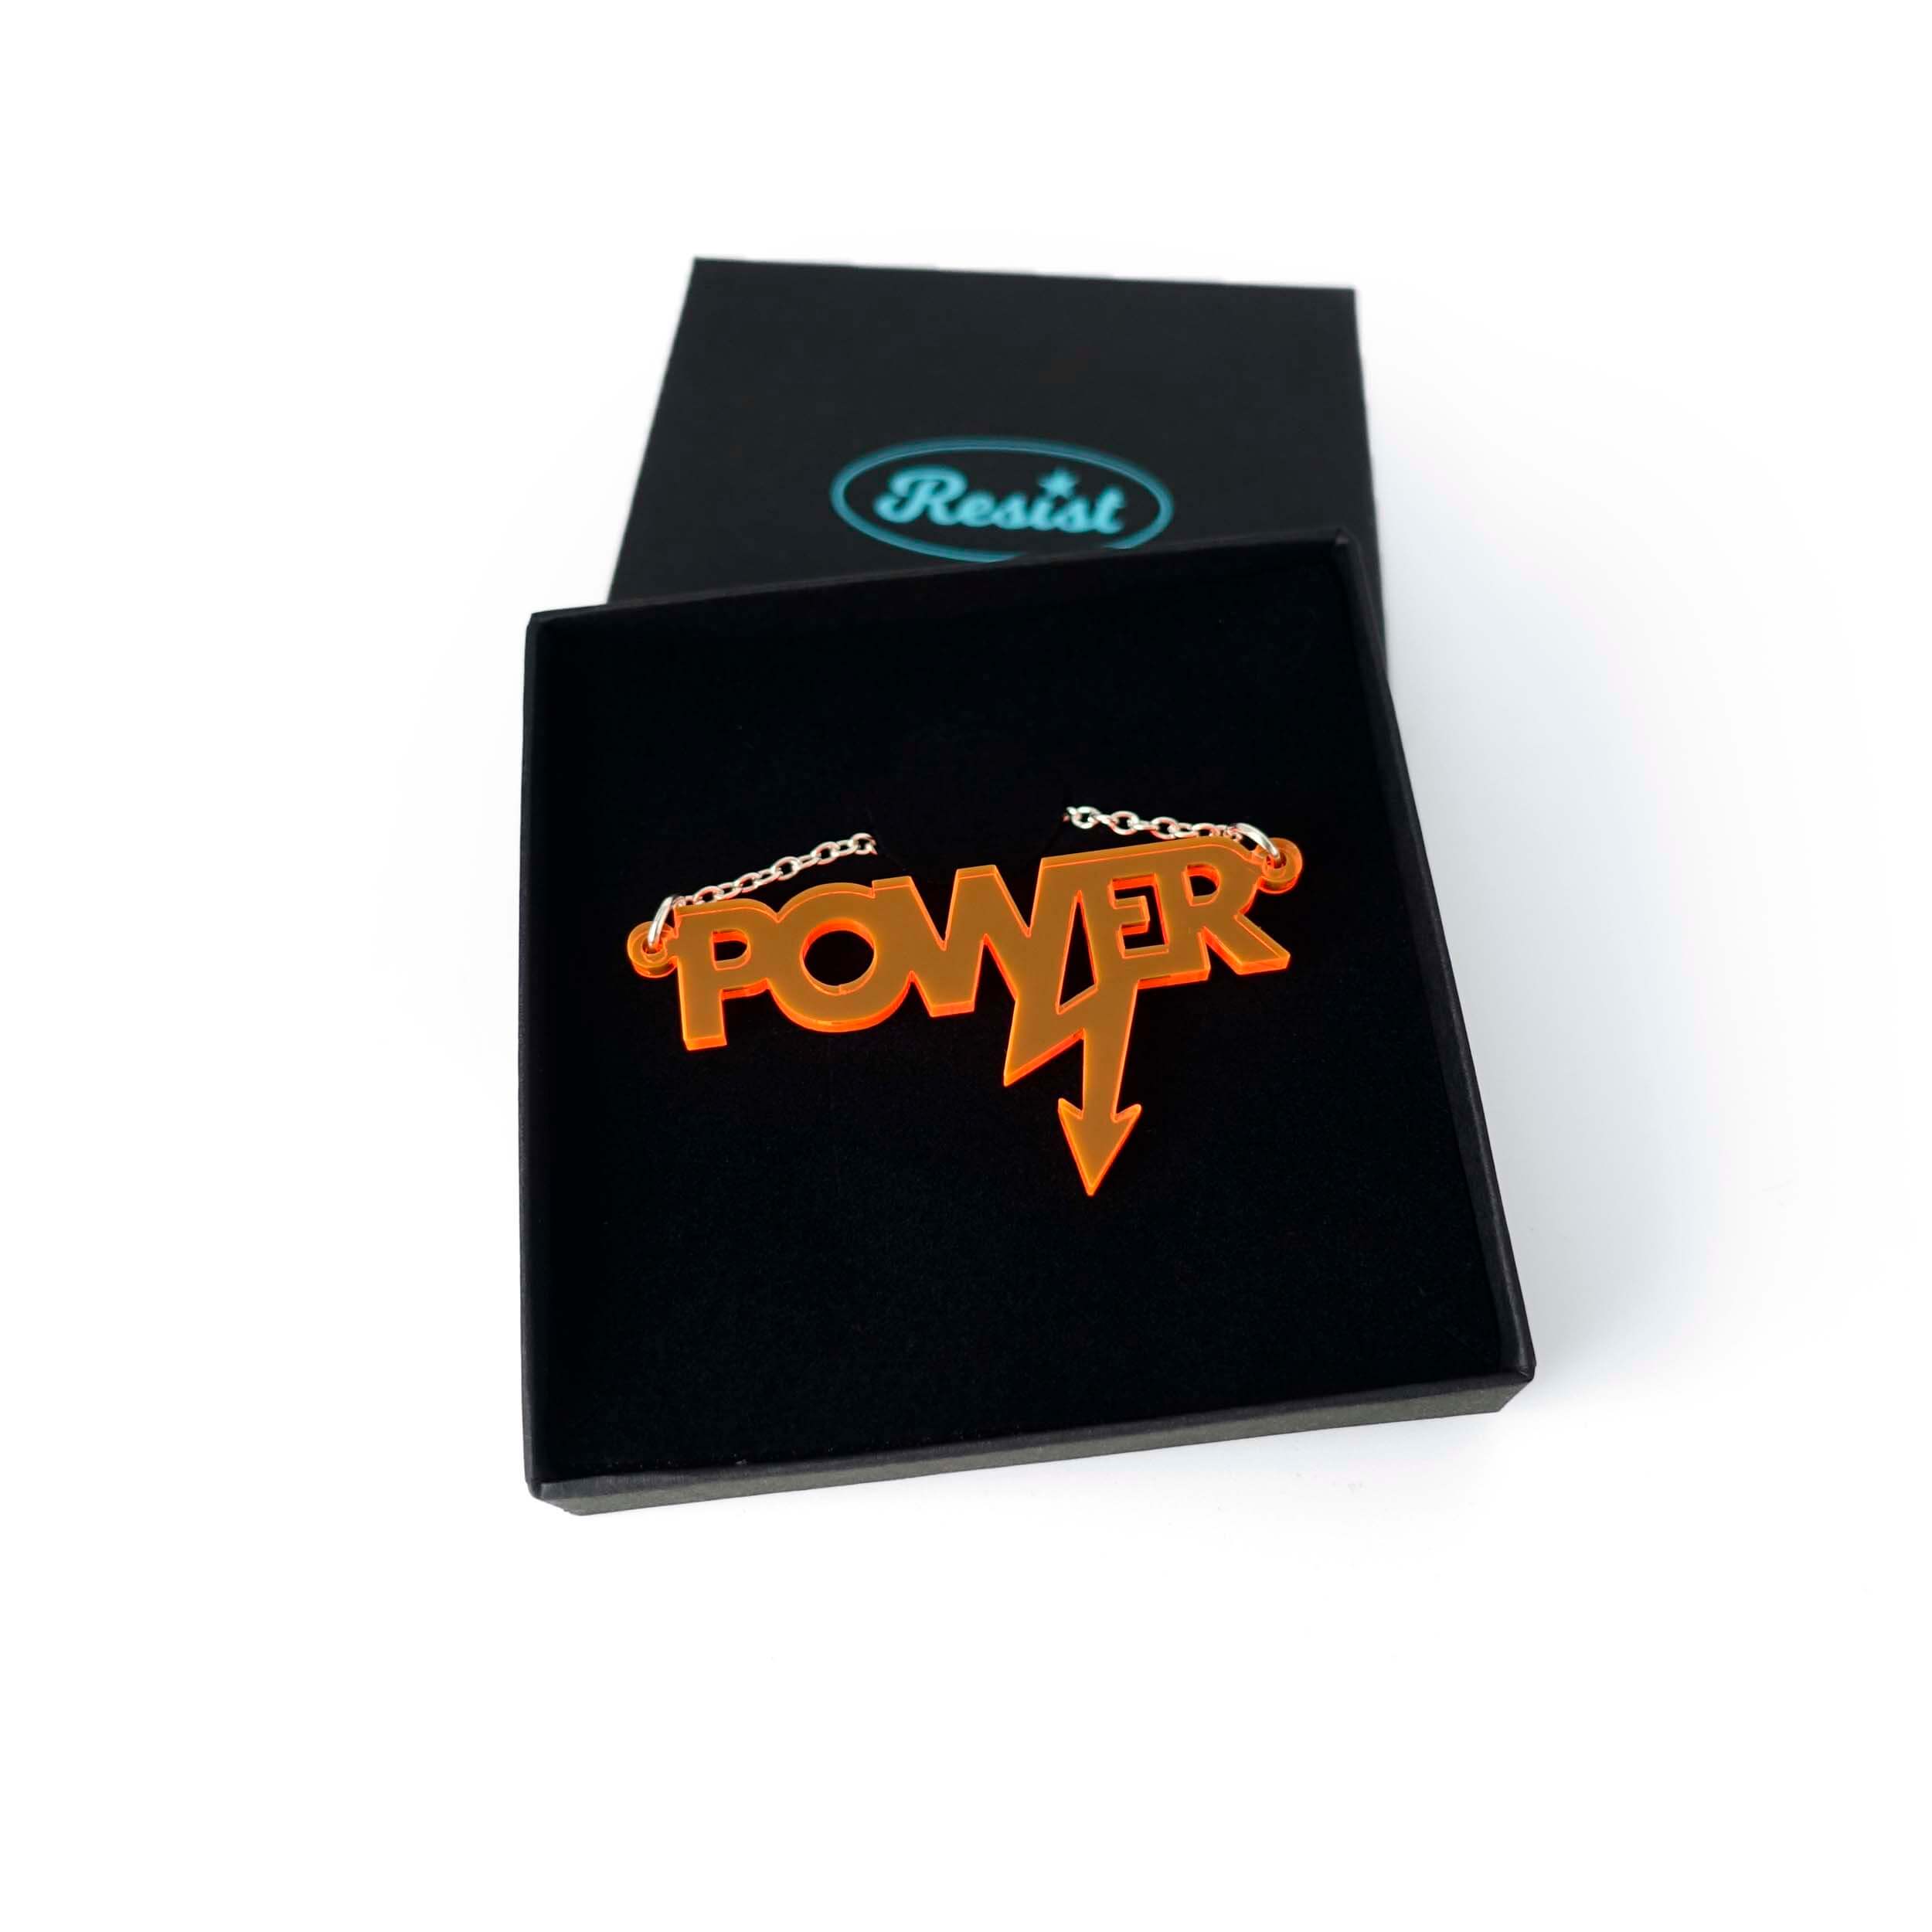 Mini power necklace in fluoro orange shown in a Wear and Resist gift box. 